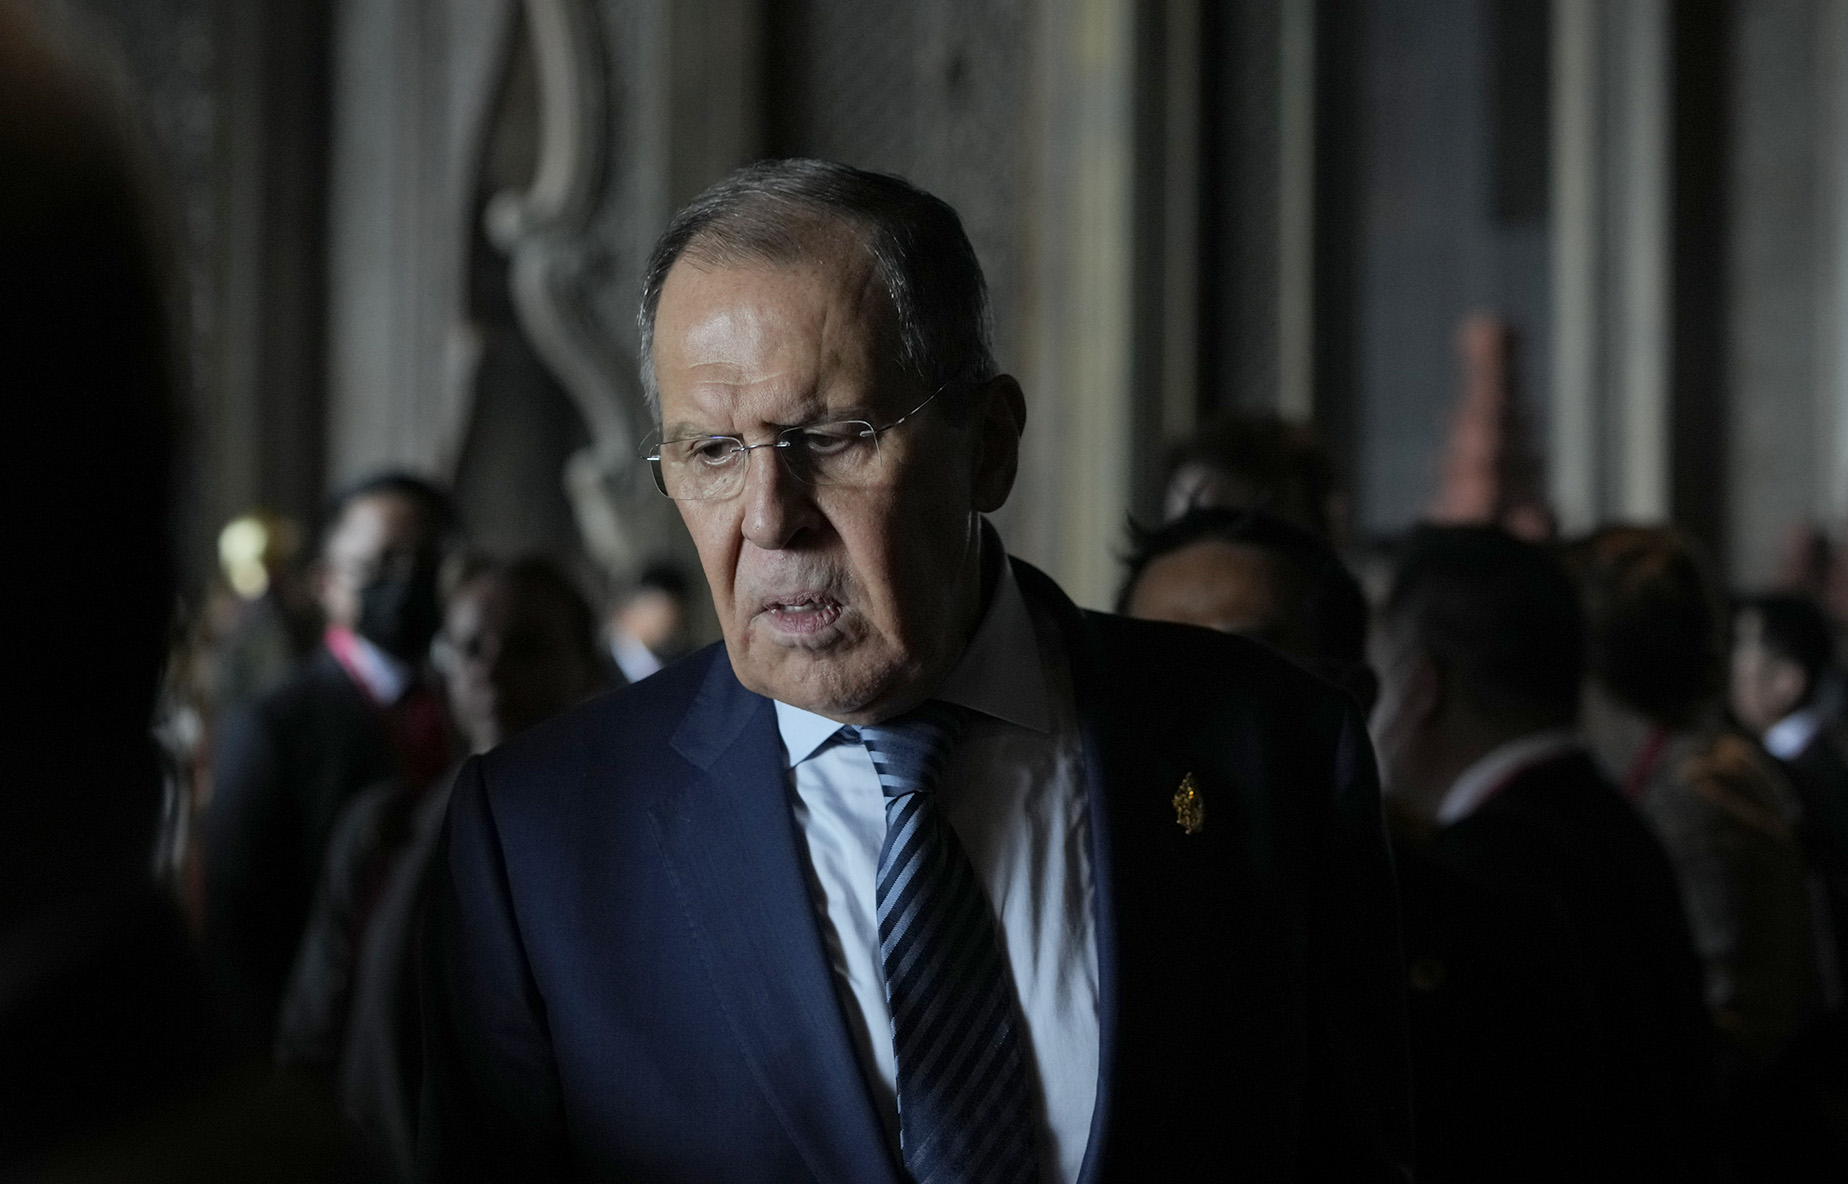 Russian Foreign Minister Sergey Lavrov walks during the G20 Summit in Bali, Indonesia, on November 15.